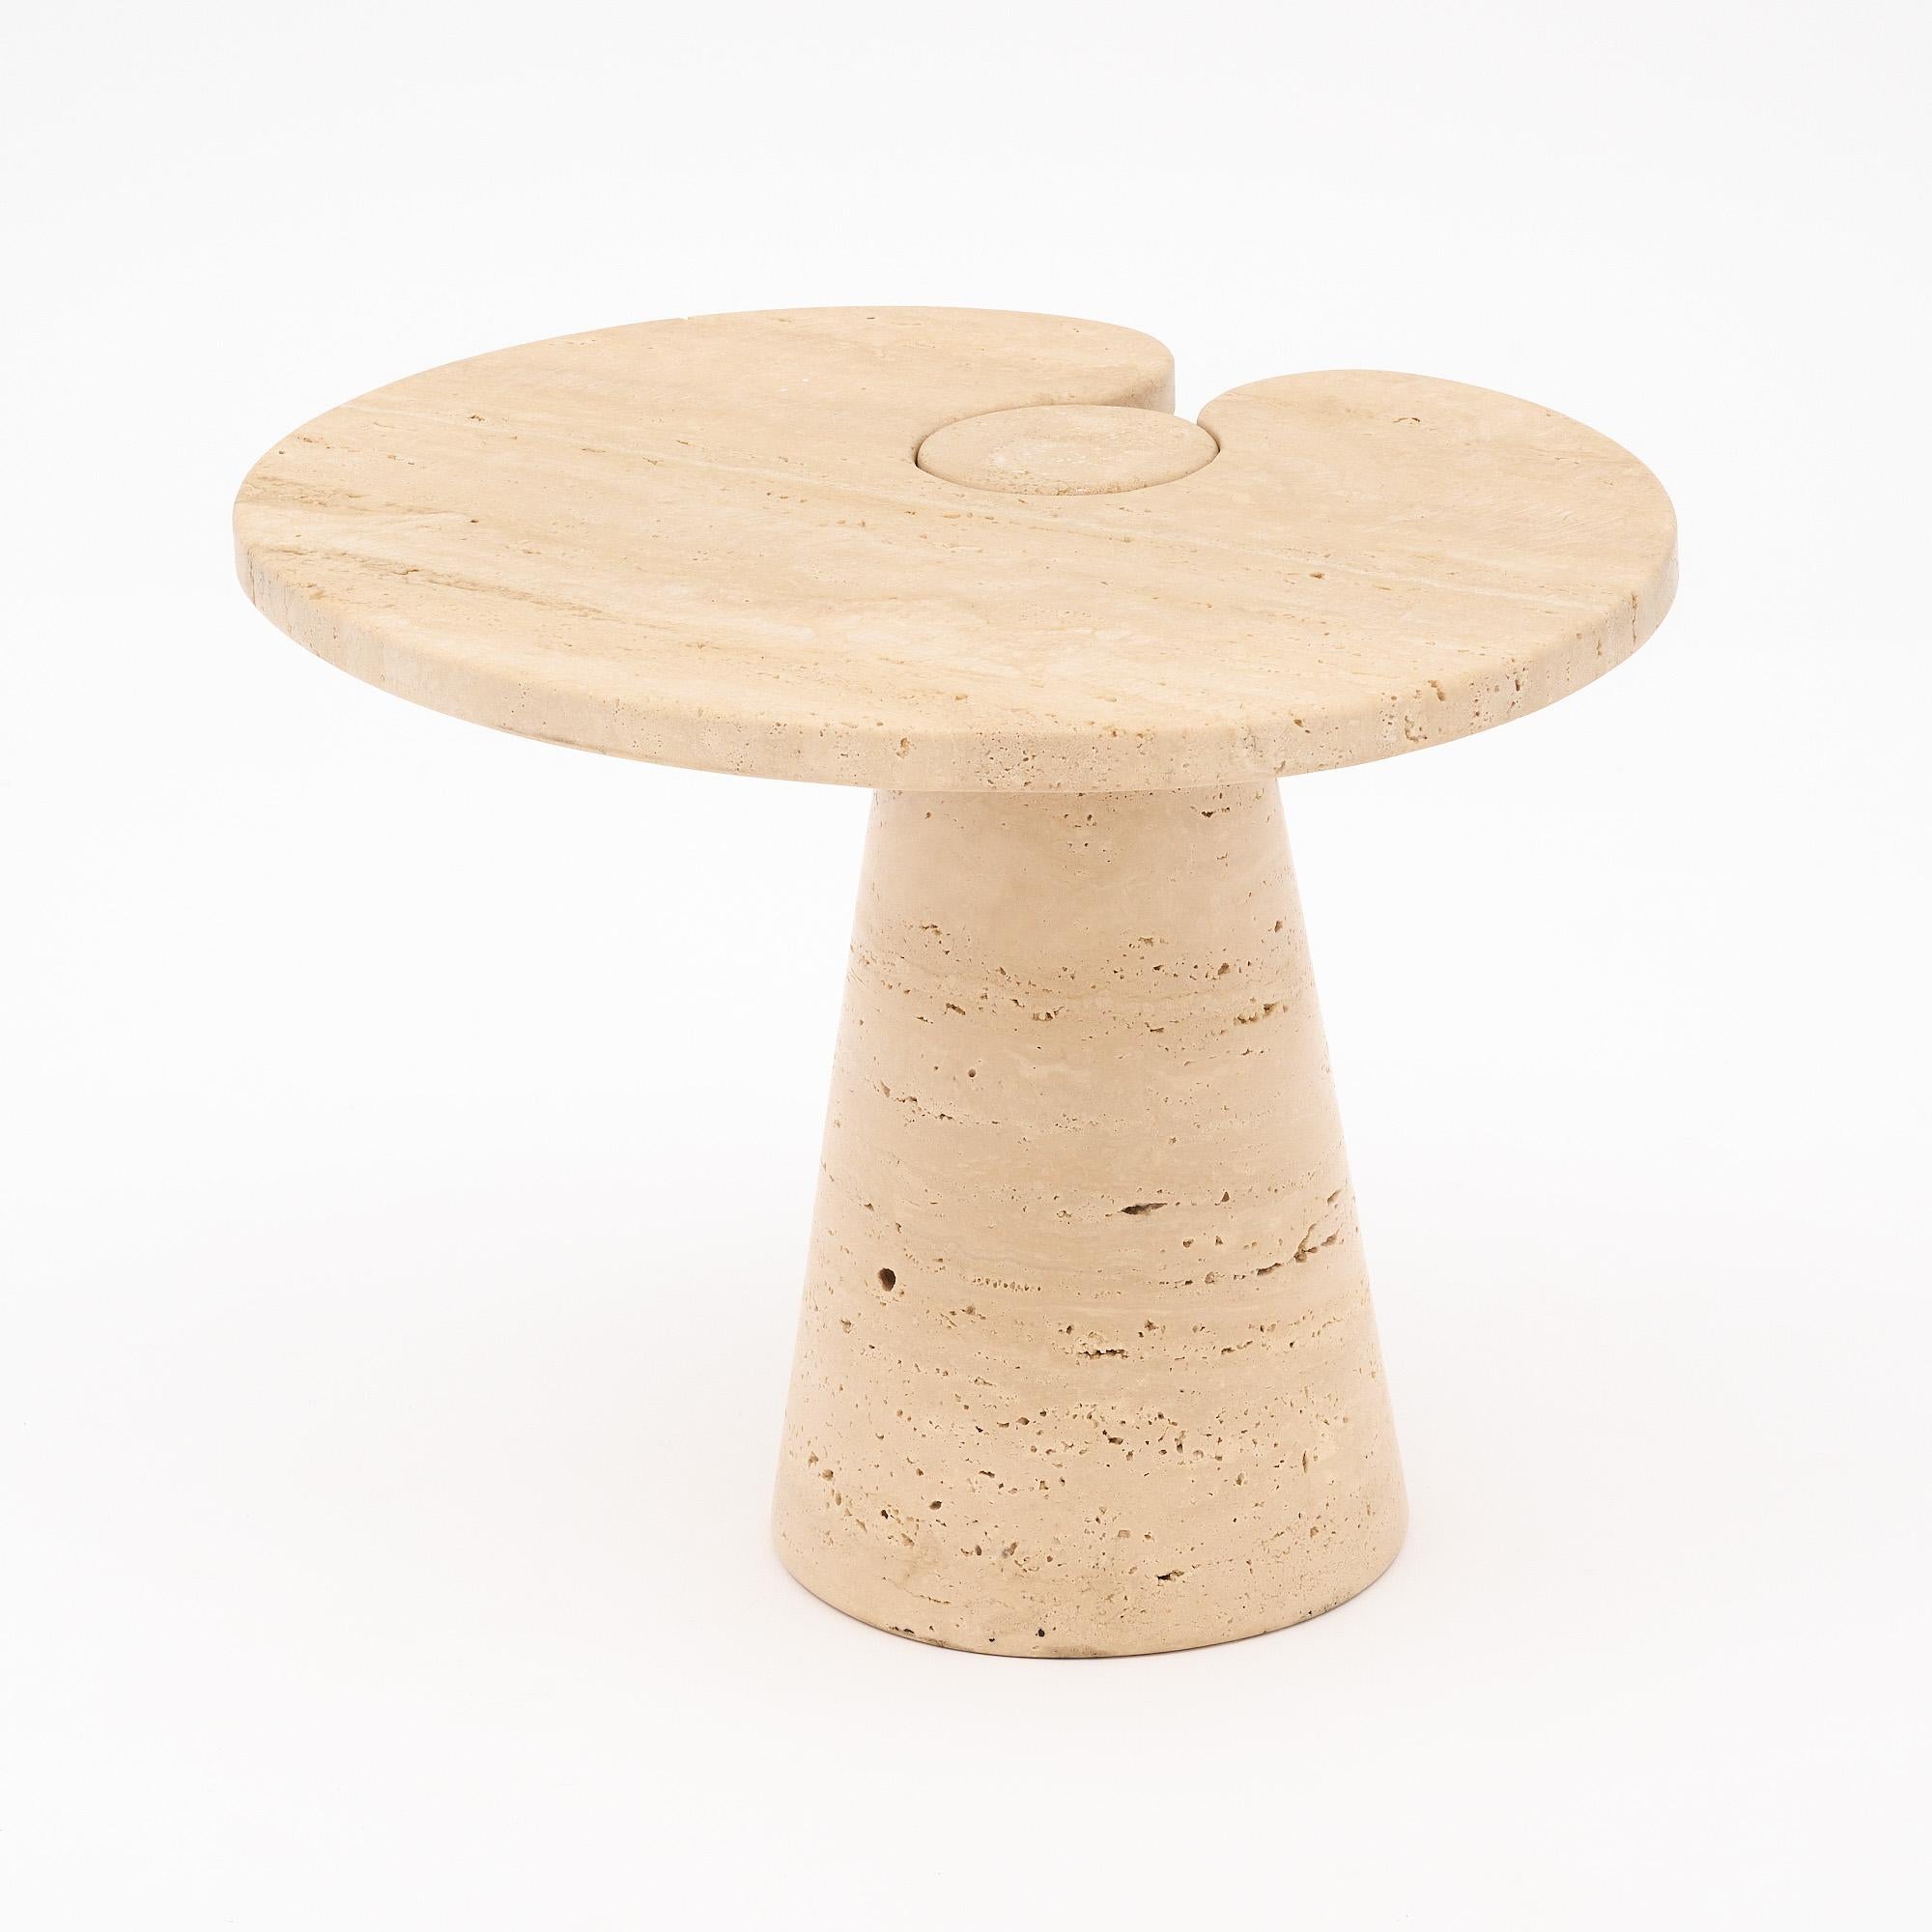 Single side table by Angelo Mangiarotti made of a striking cream toned travertine. Part of the Eros series and produced for Skipper, Italy 1970s. The top fits perfectly on the base for a seamless design.
